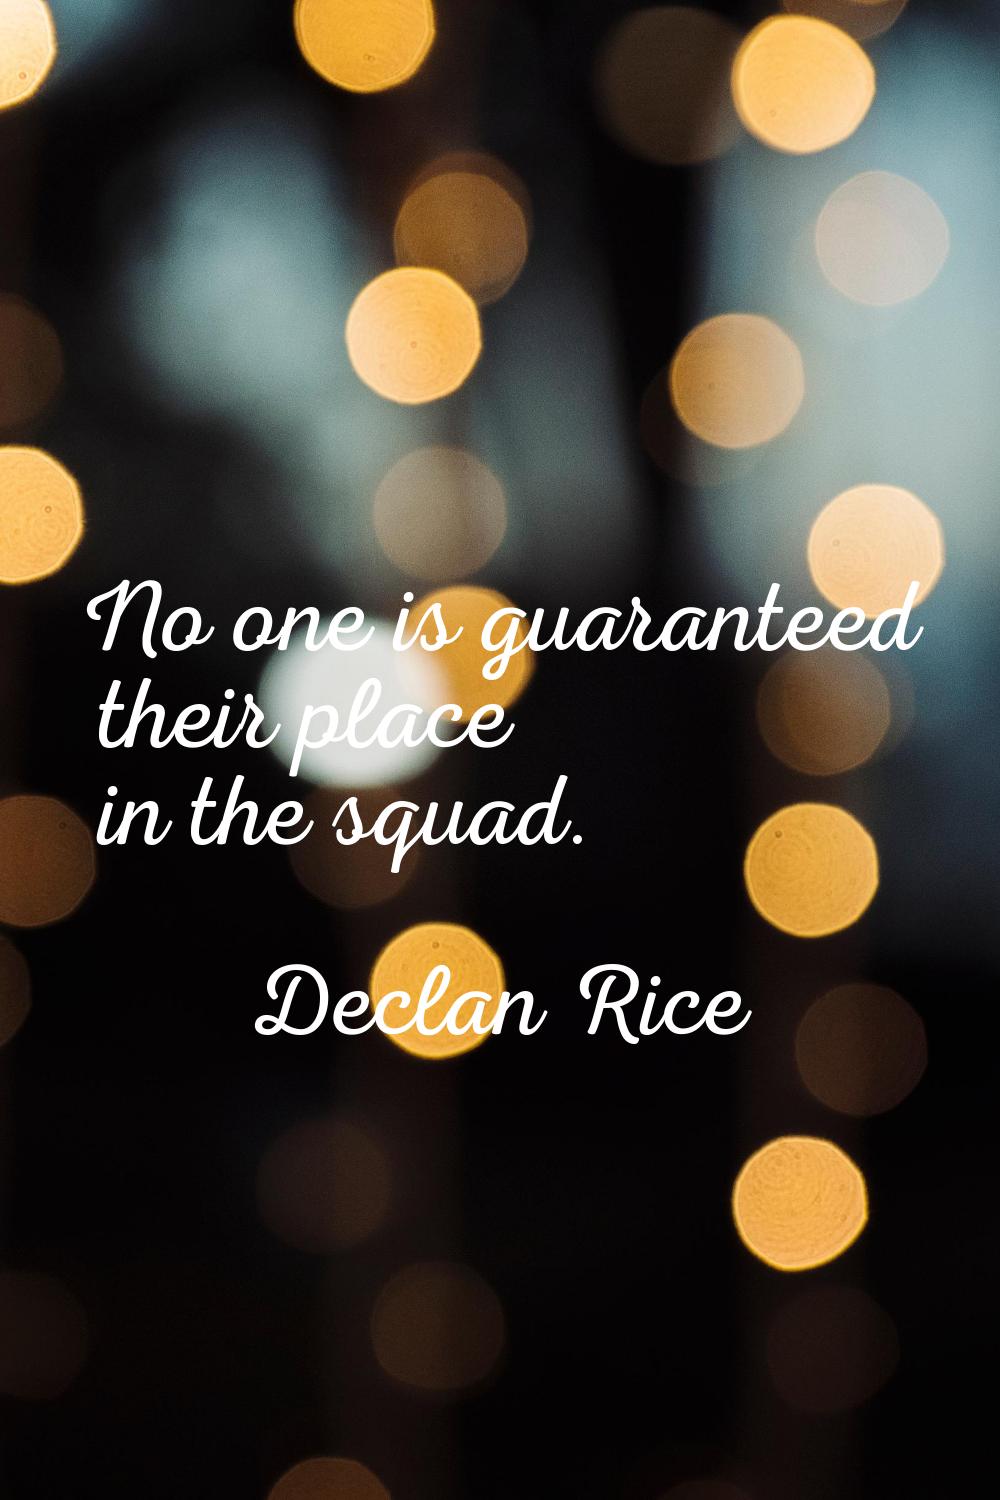 No one is guaranteed their place in the squad.